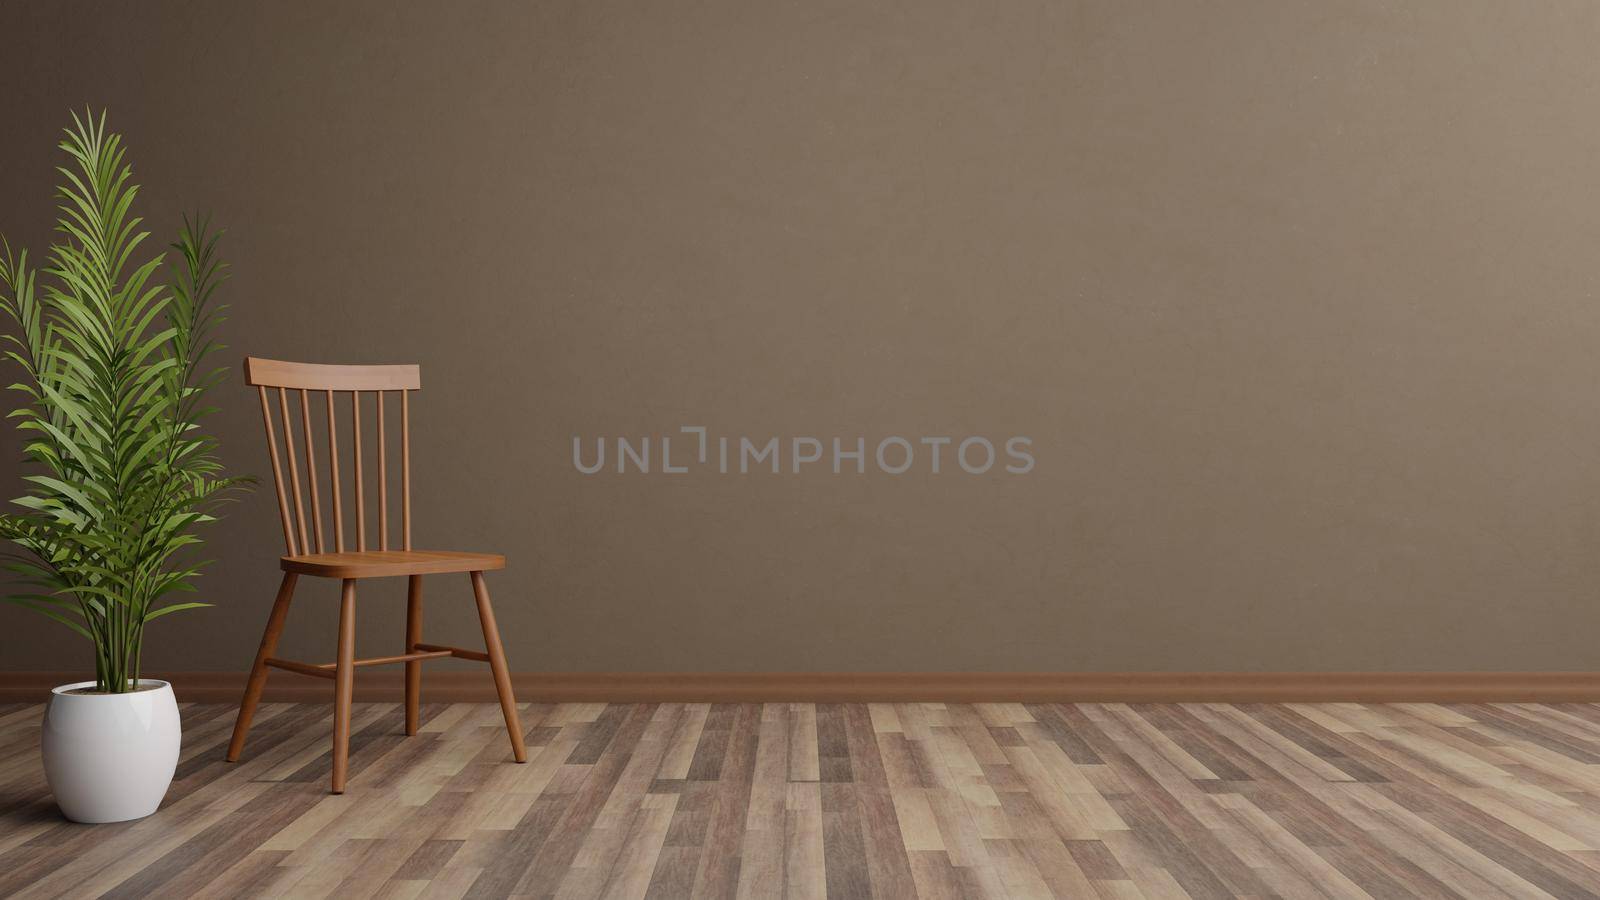 A Chair On Concrete Polished Wall And Plant On The Side, Parquet Floor, 3D Illustration